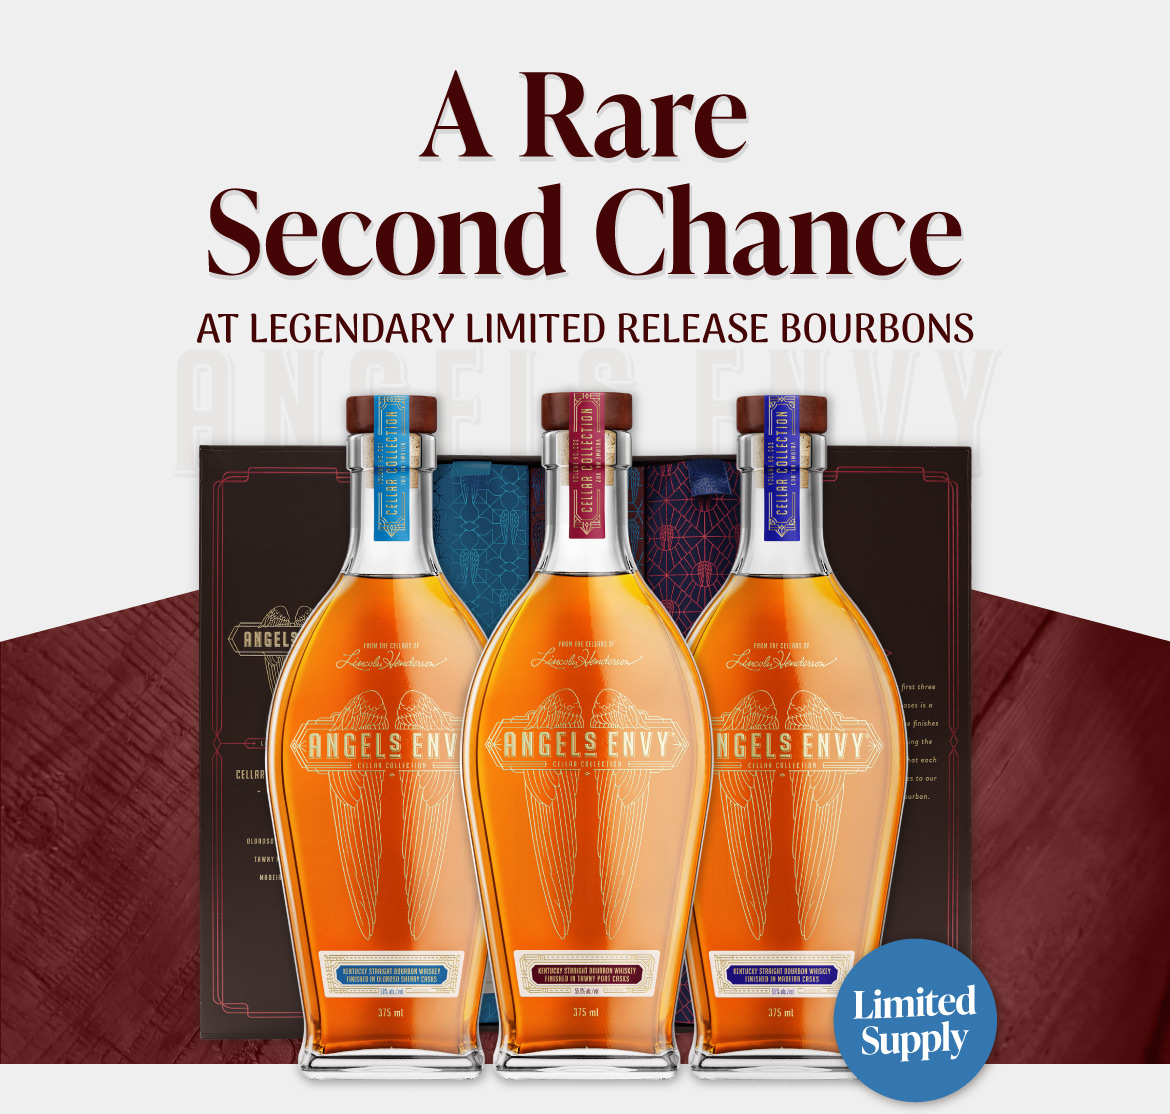 A Rare Second Chance to Own Legendary Bourbons